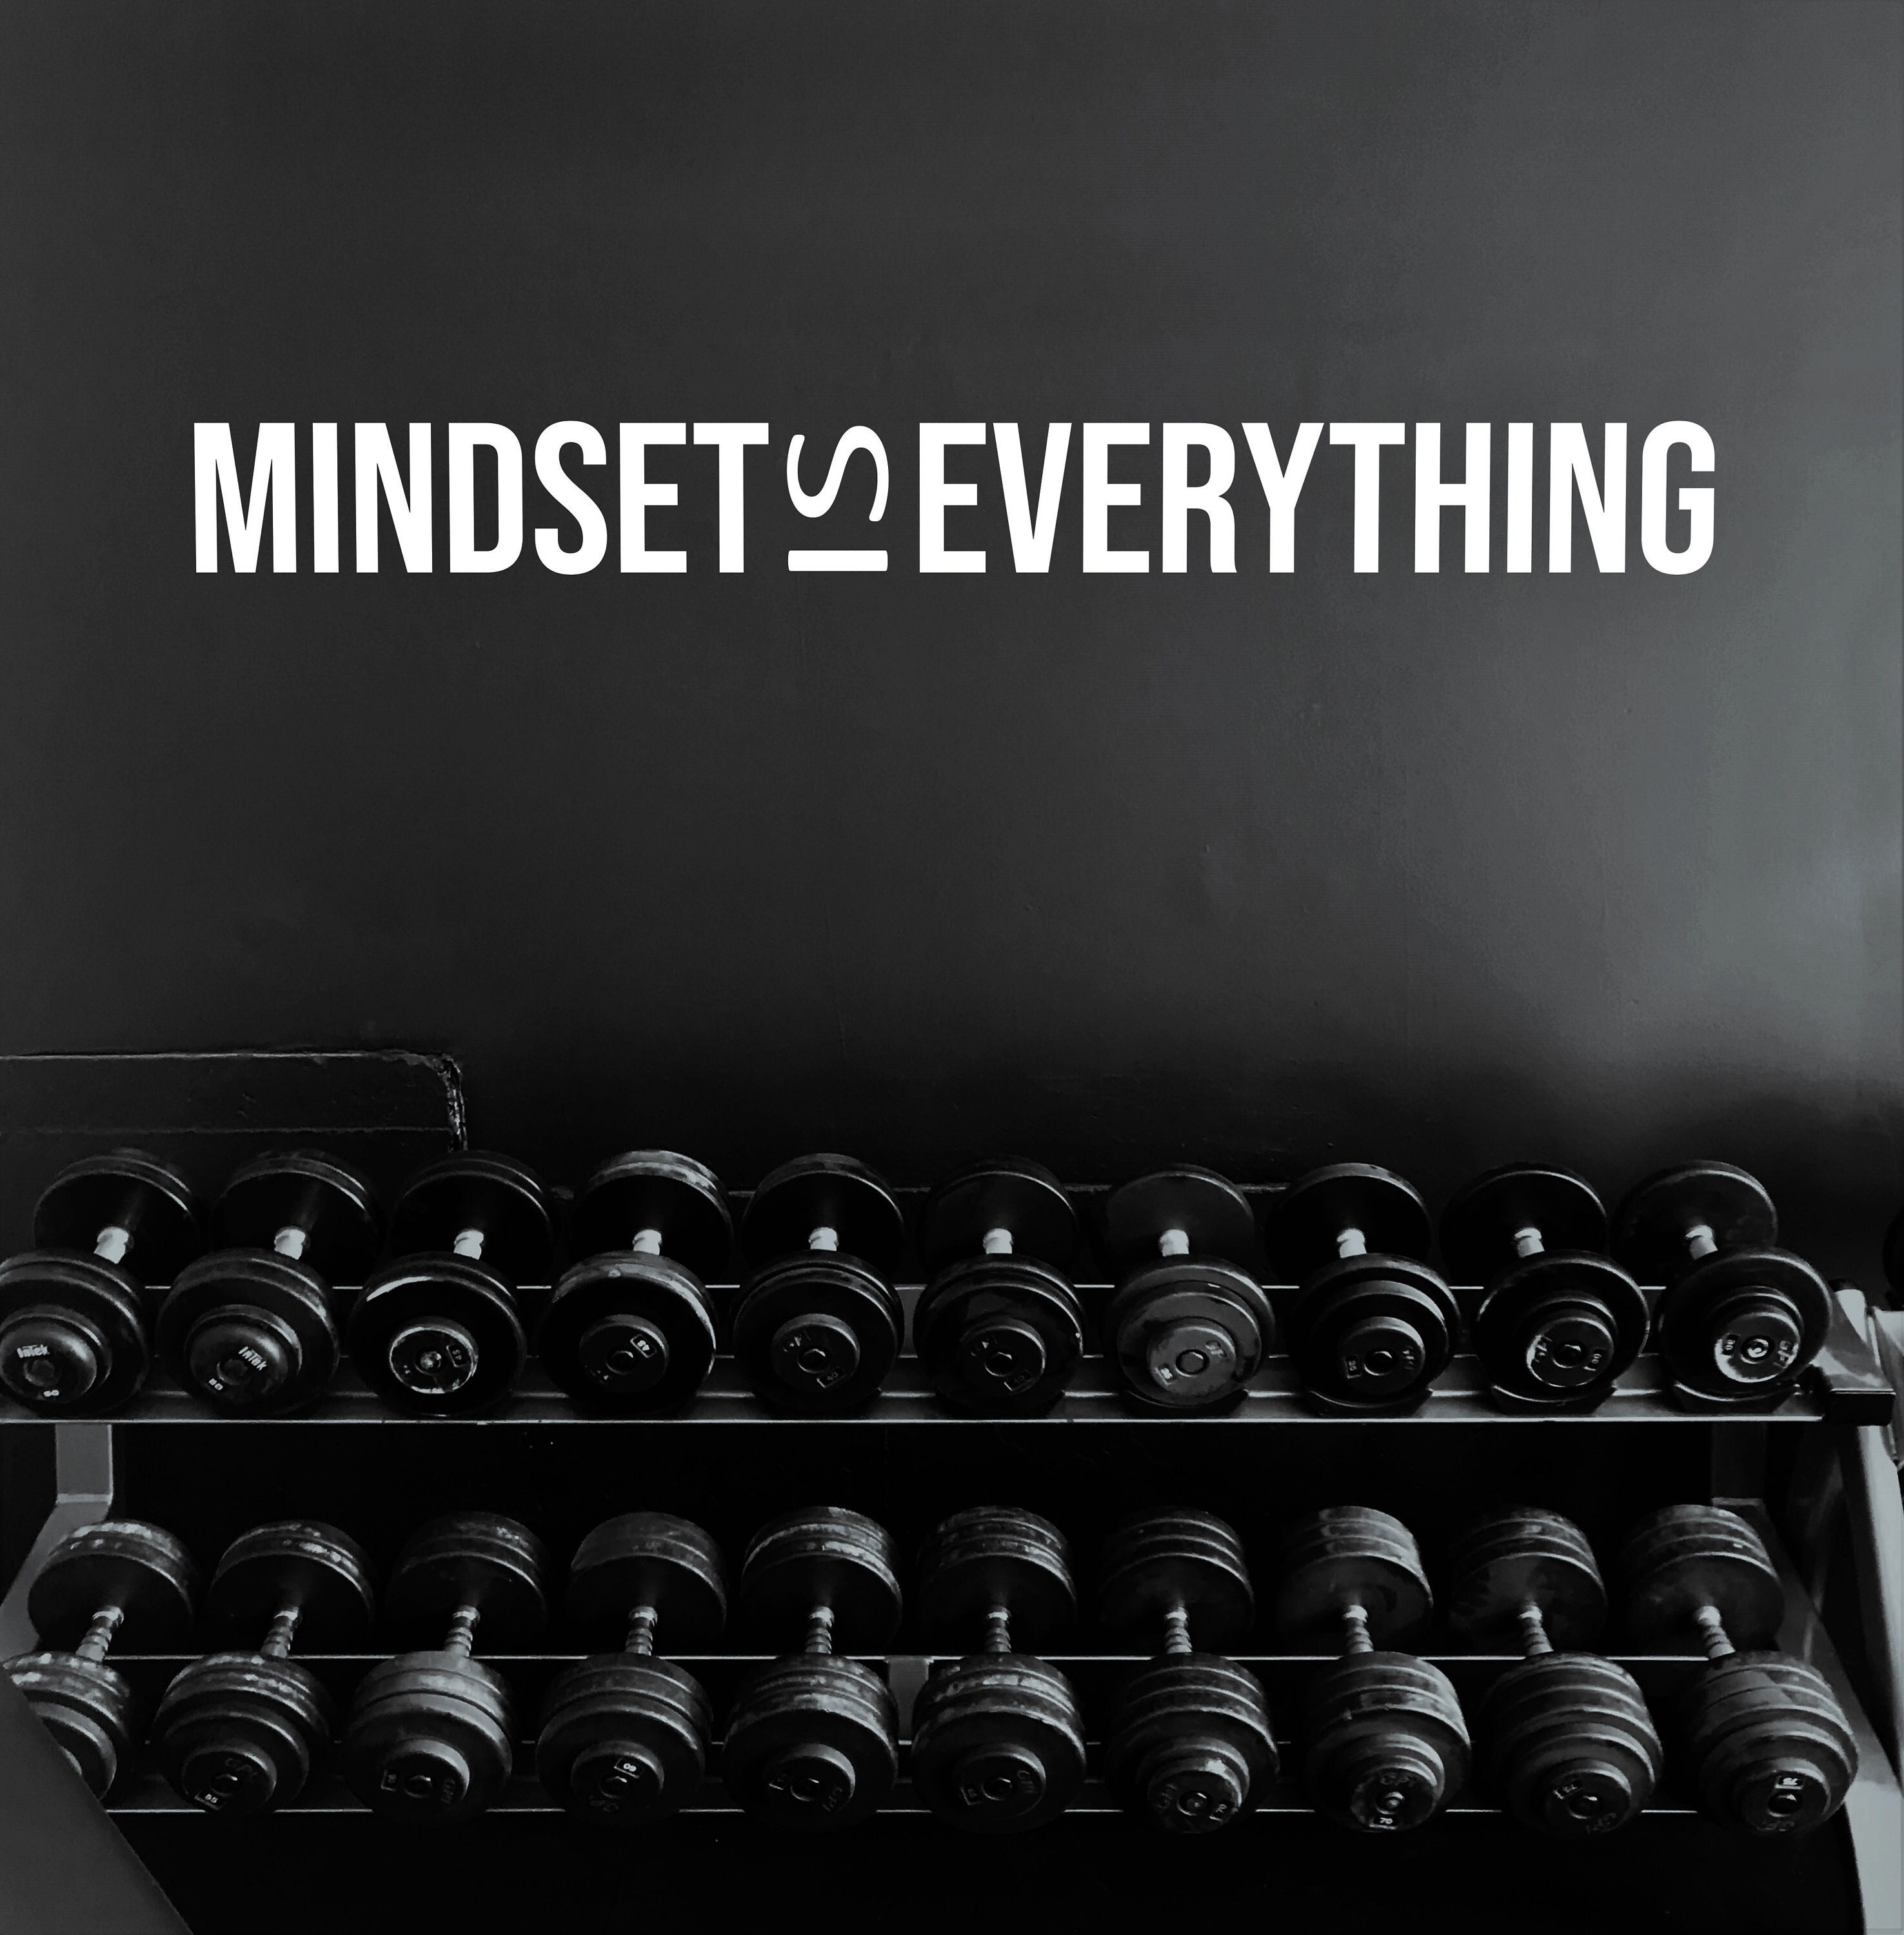 MINDSET IS EVERYTHING Gym Wall Decal Gym Gym